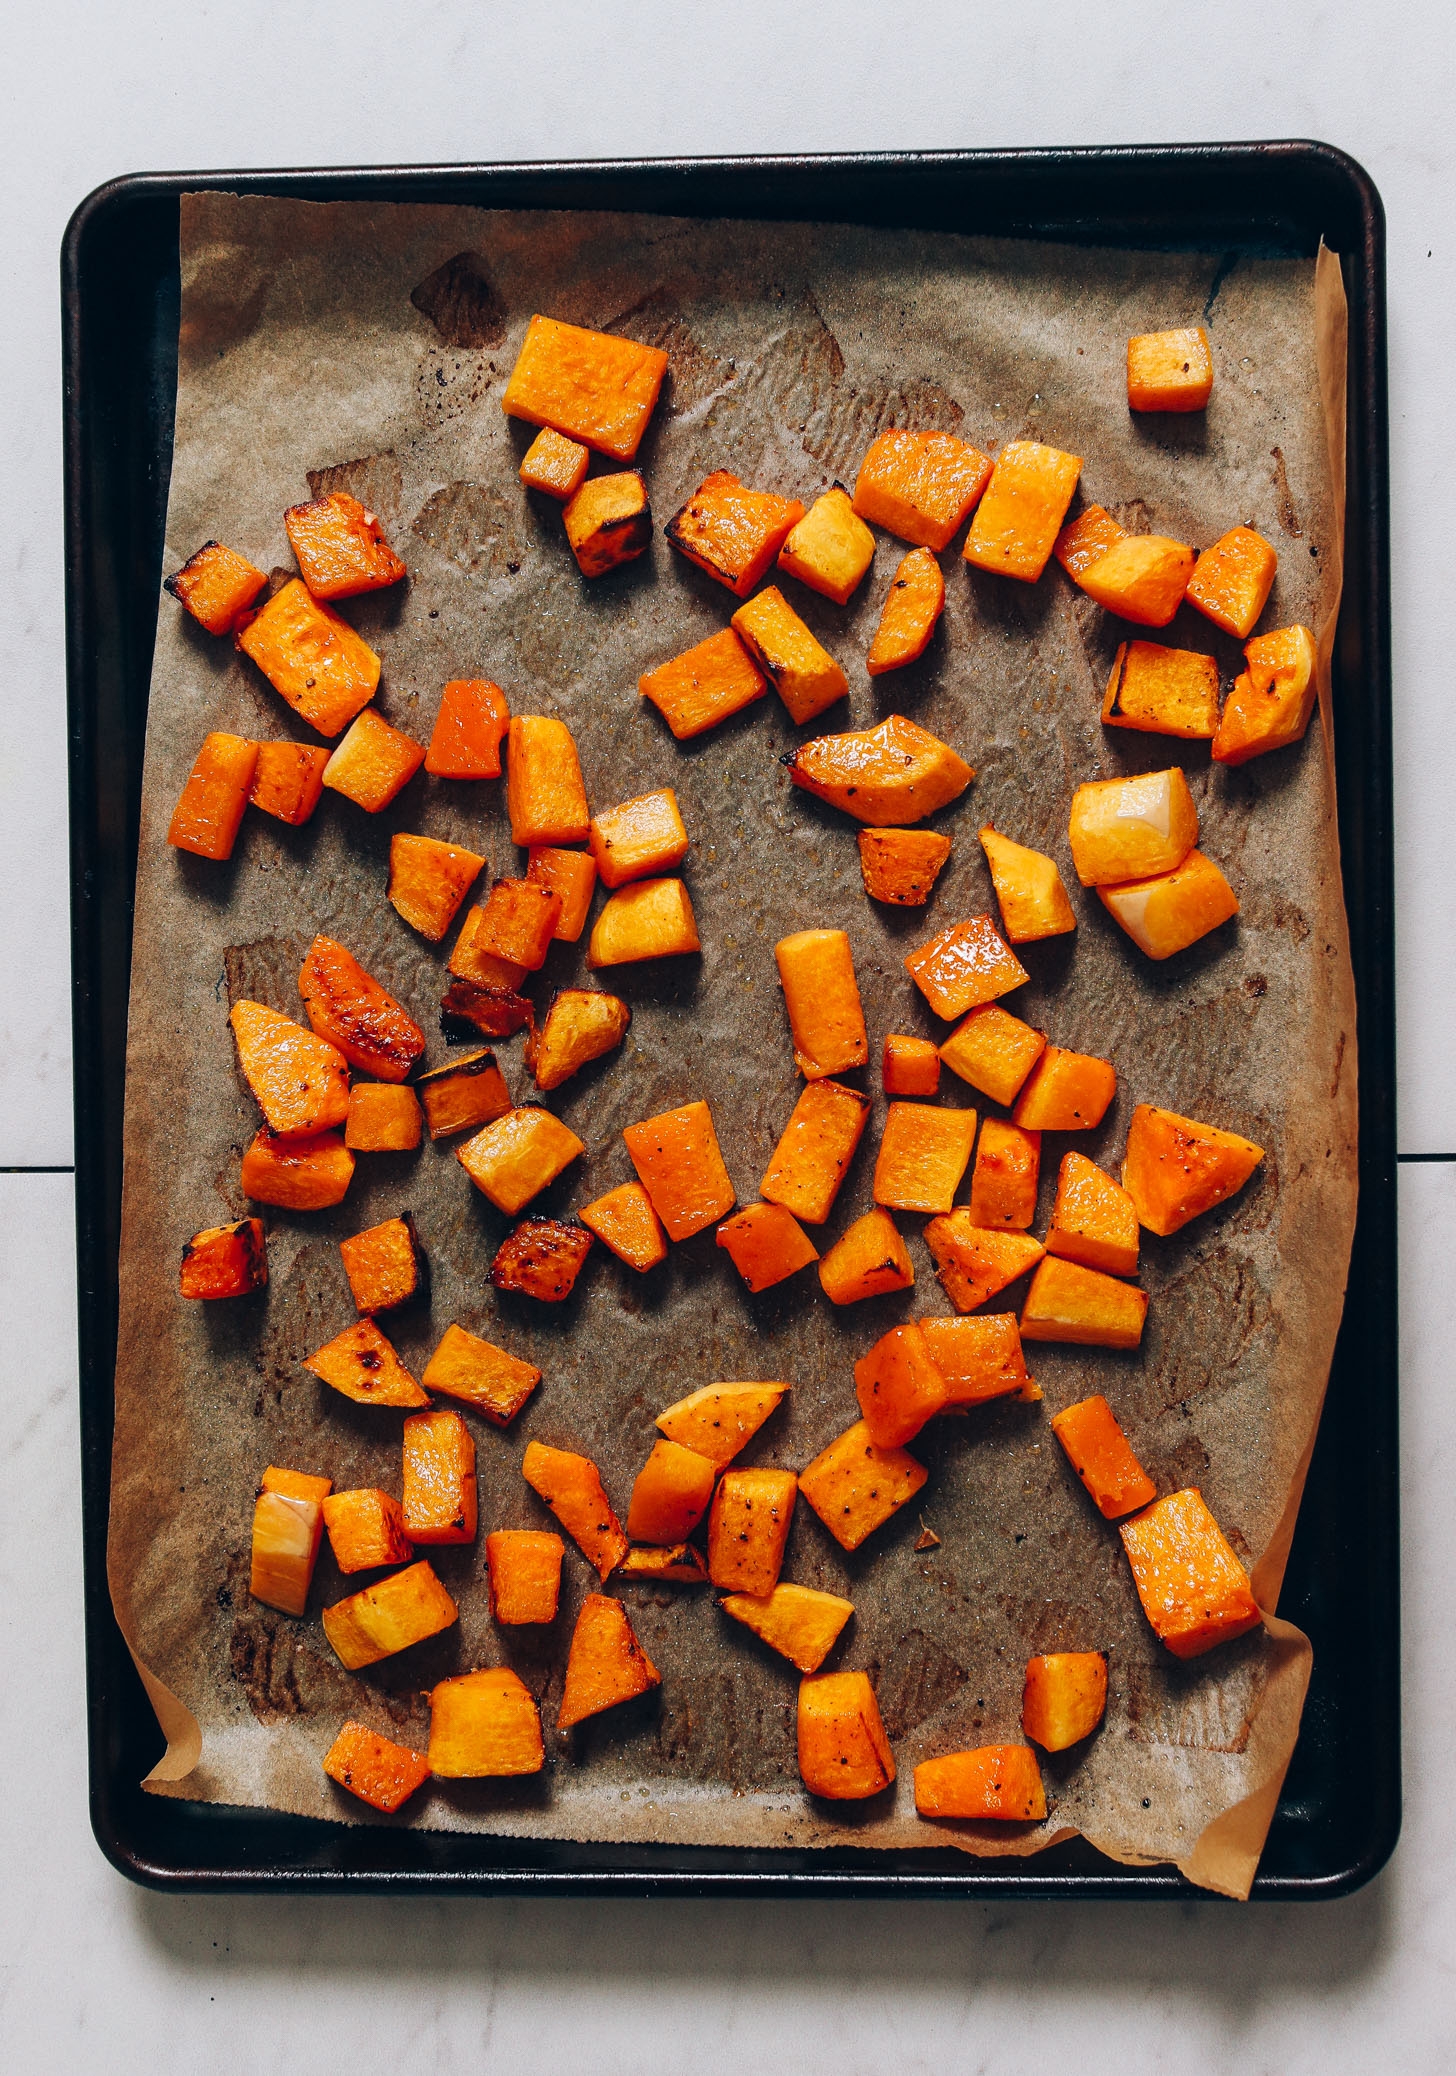 Parchment-lined baking sheet of roasted butternut squash